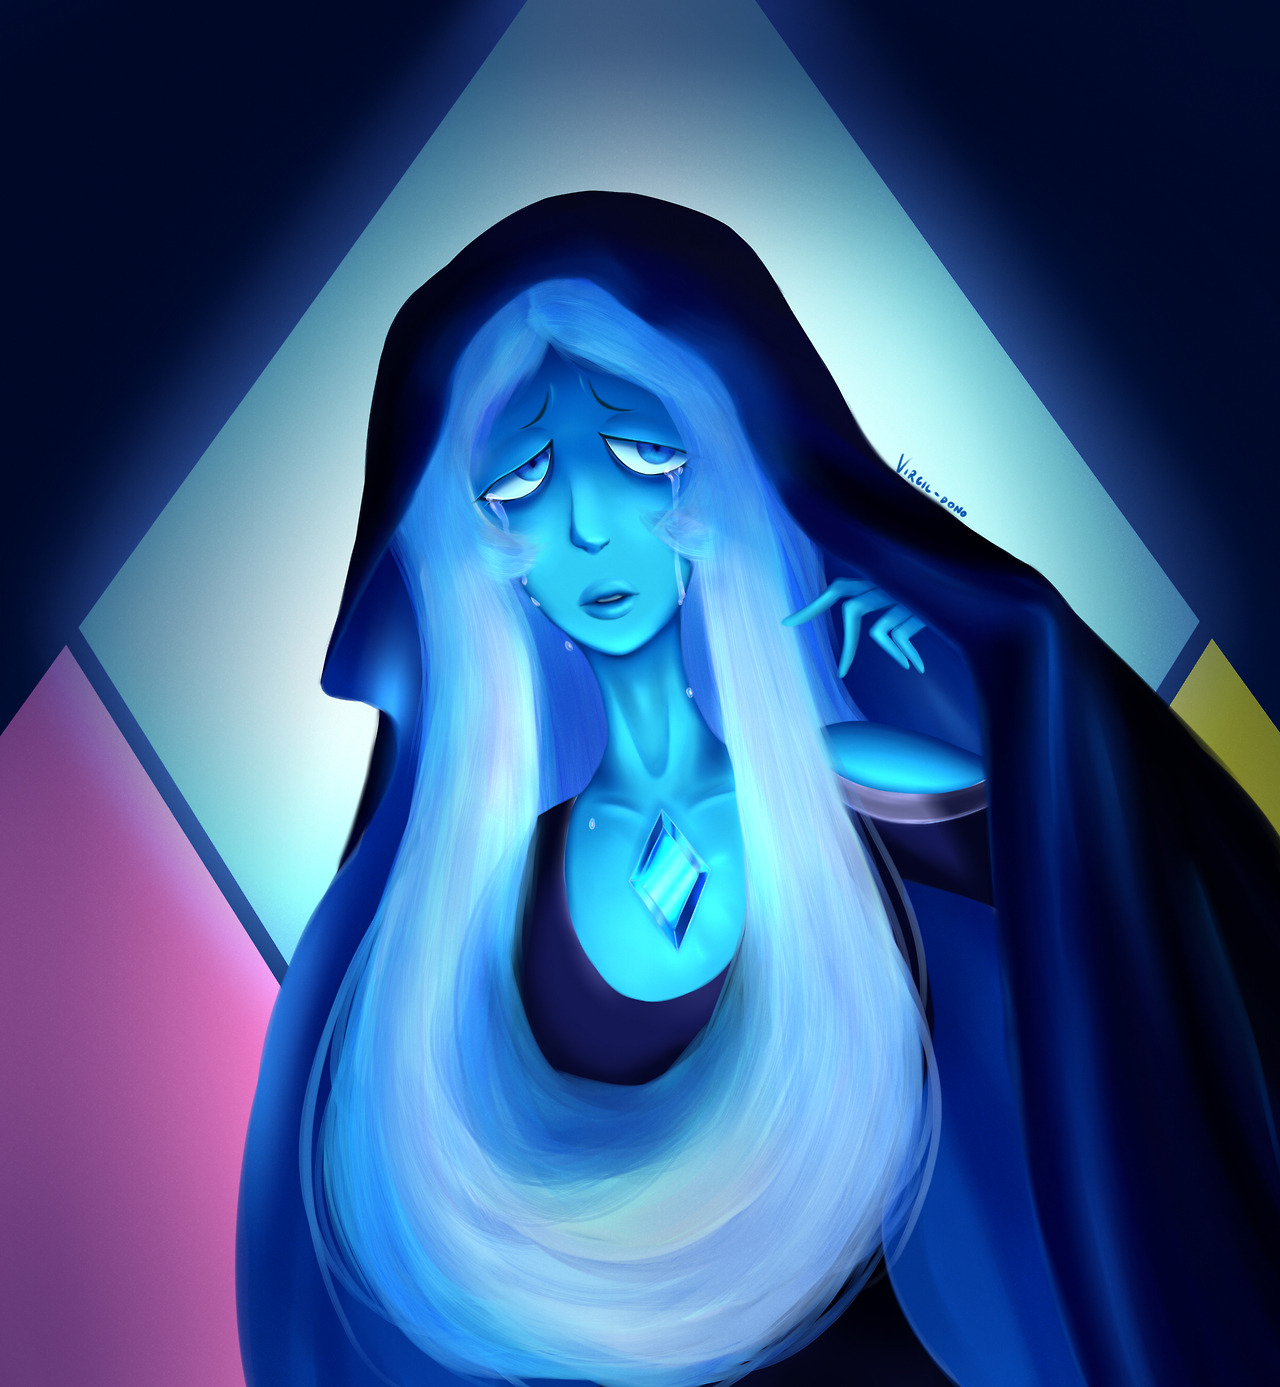 Big blue mom. Wanted to try digital painting again after almost a year, this time i really like the result. Hope you like it.